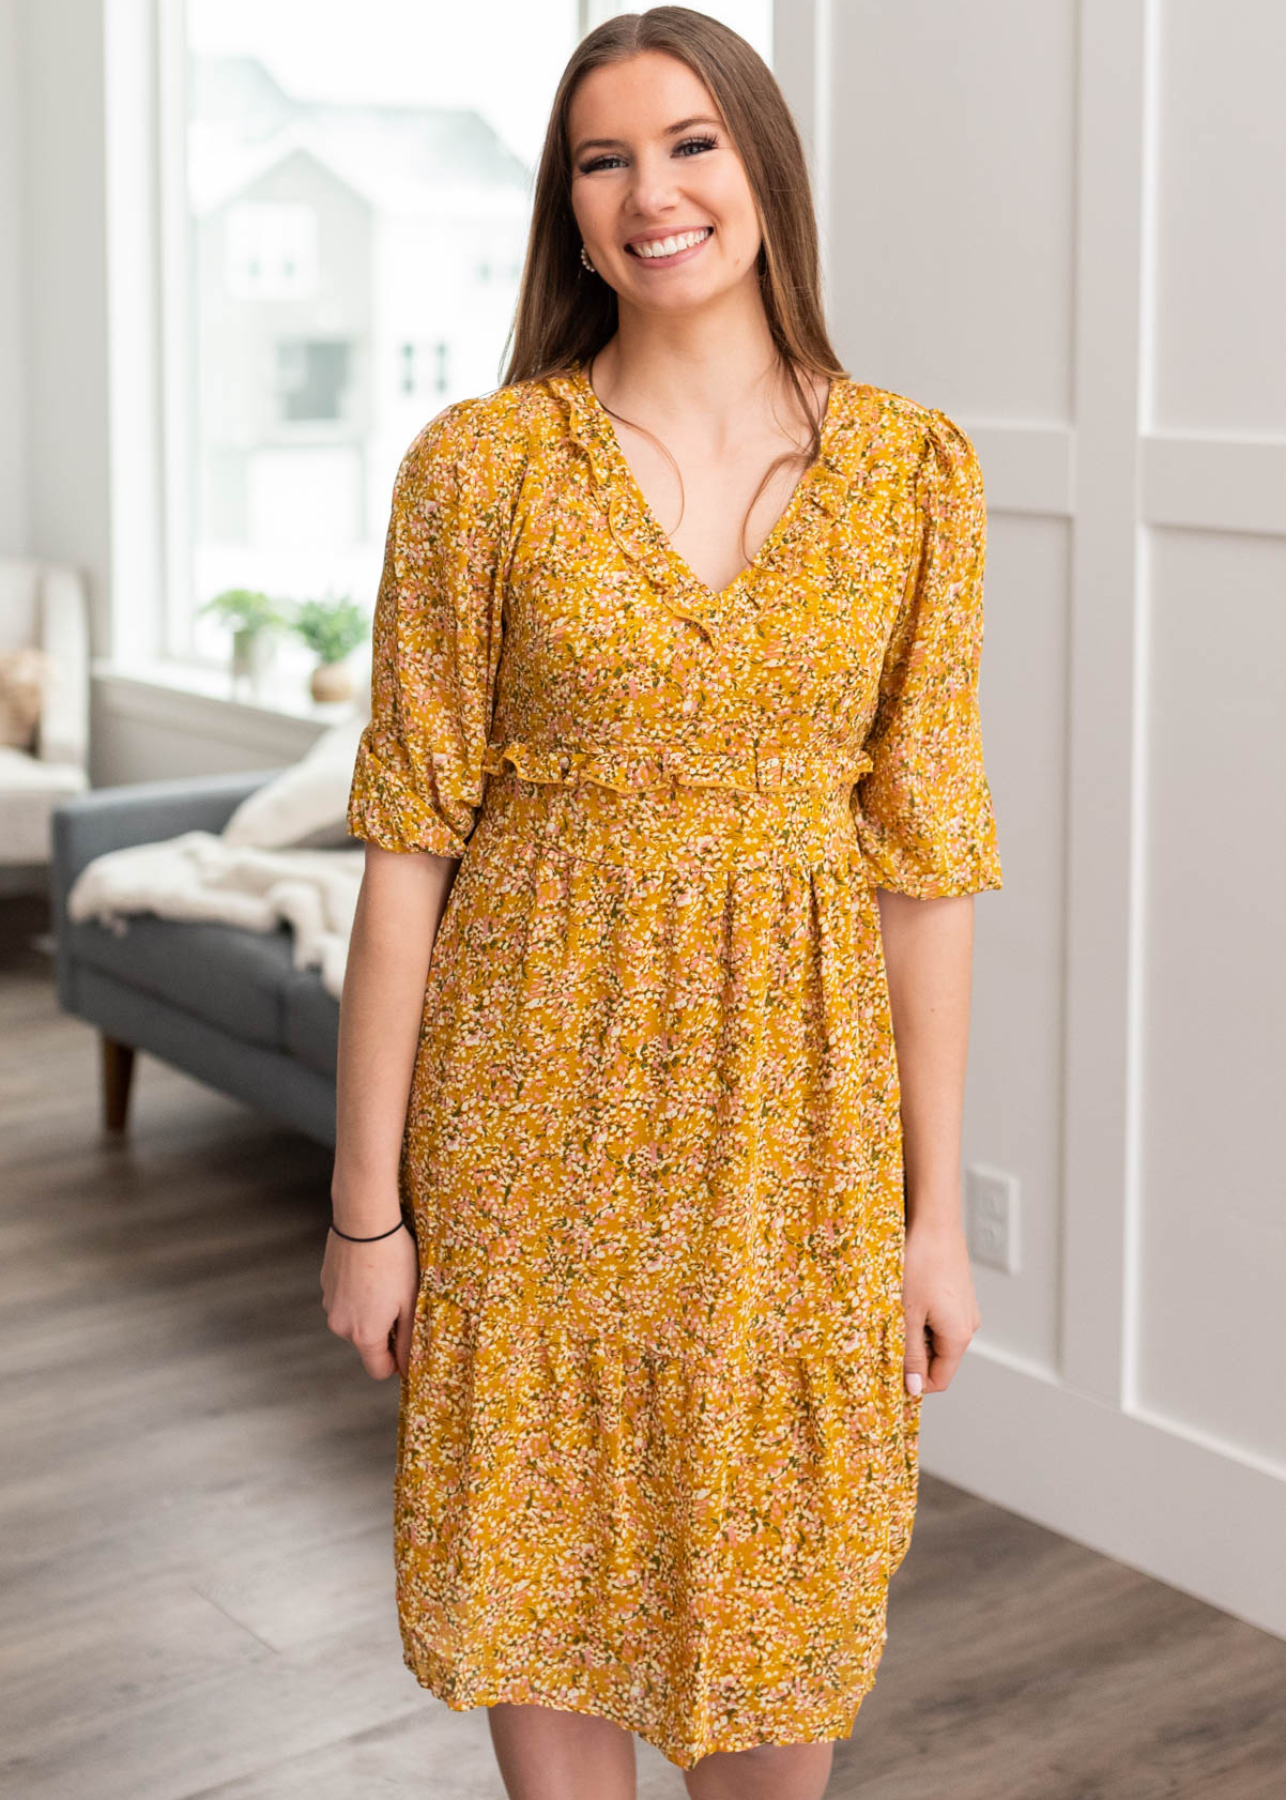 Short sleeve mustard floral dress with smocked bodice and v-neck